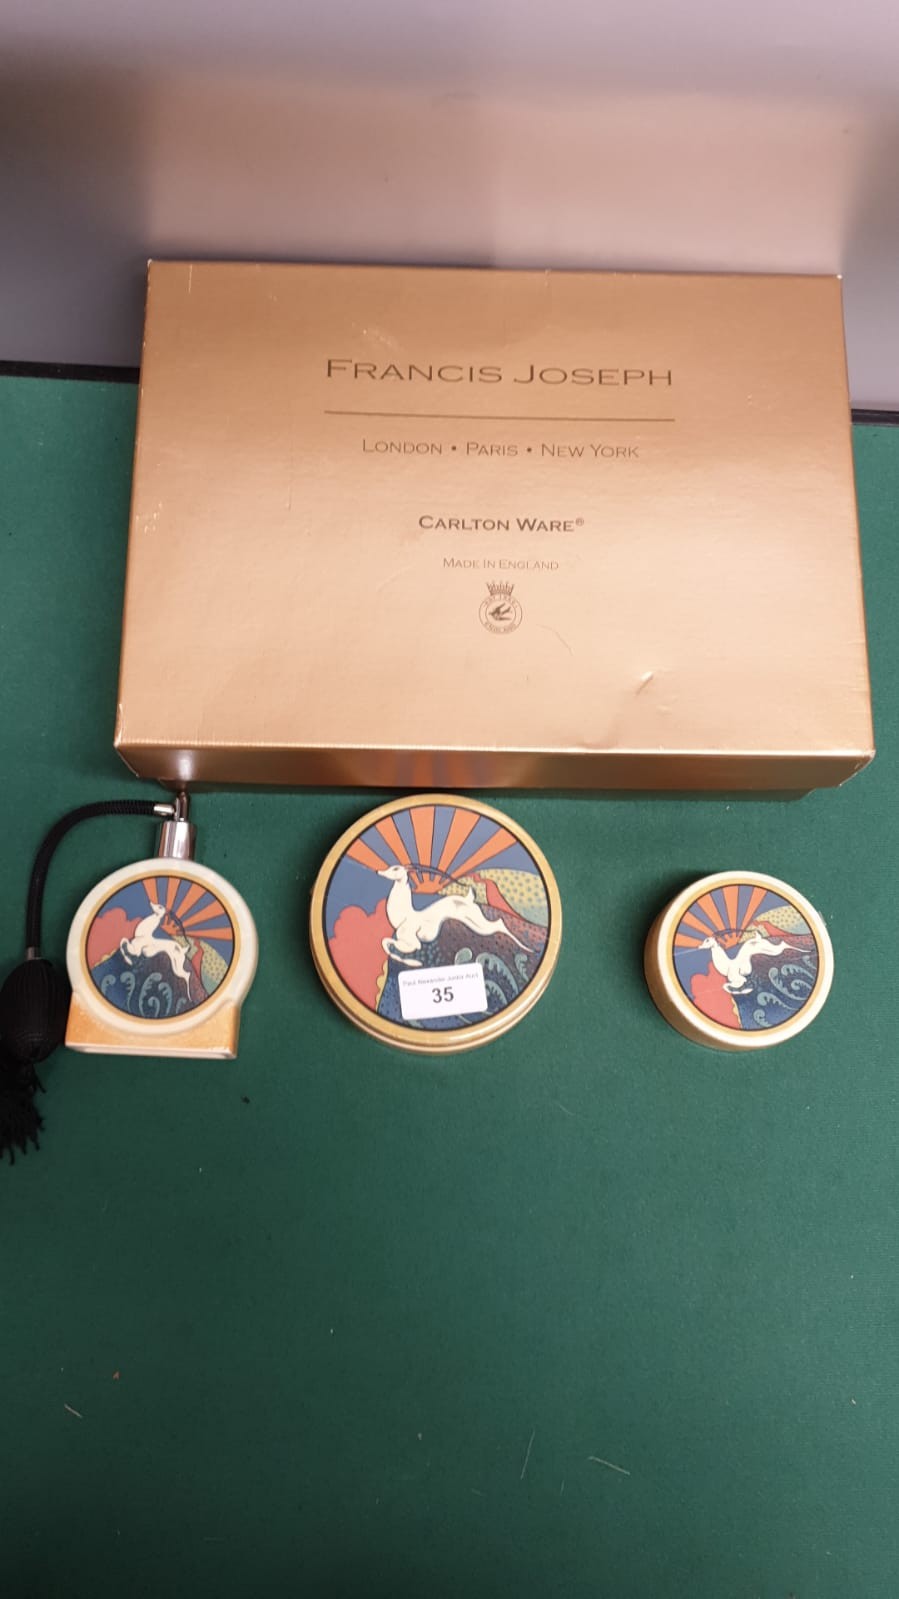 Carlton ware Joseph Francis art deco perfume bottle , with 2 preserve powder dishes set with - Image 2 of 6